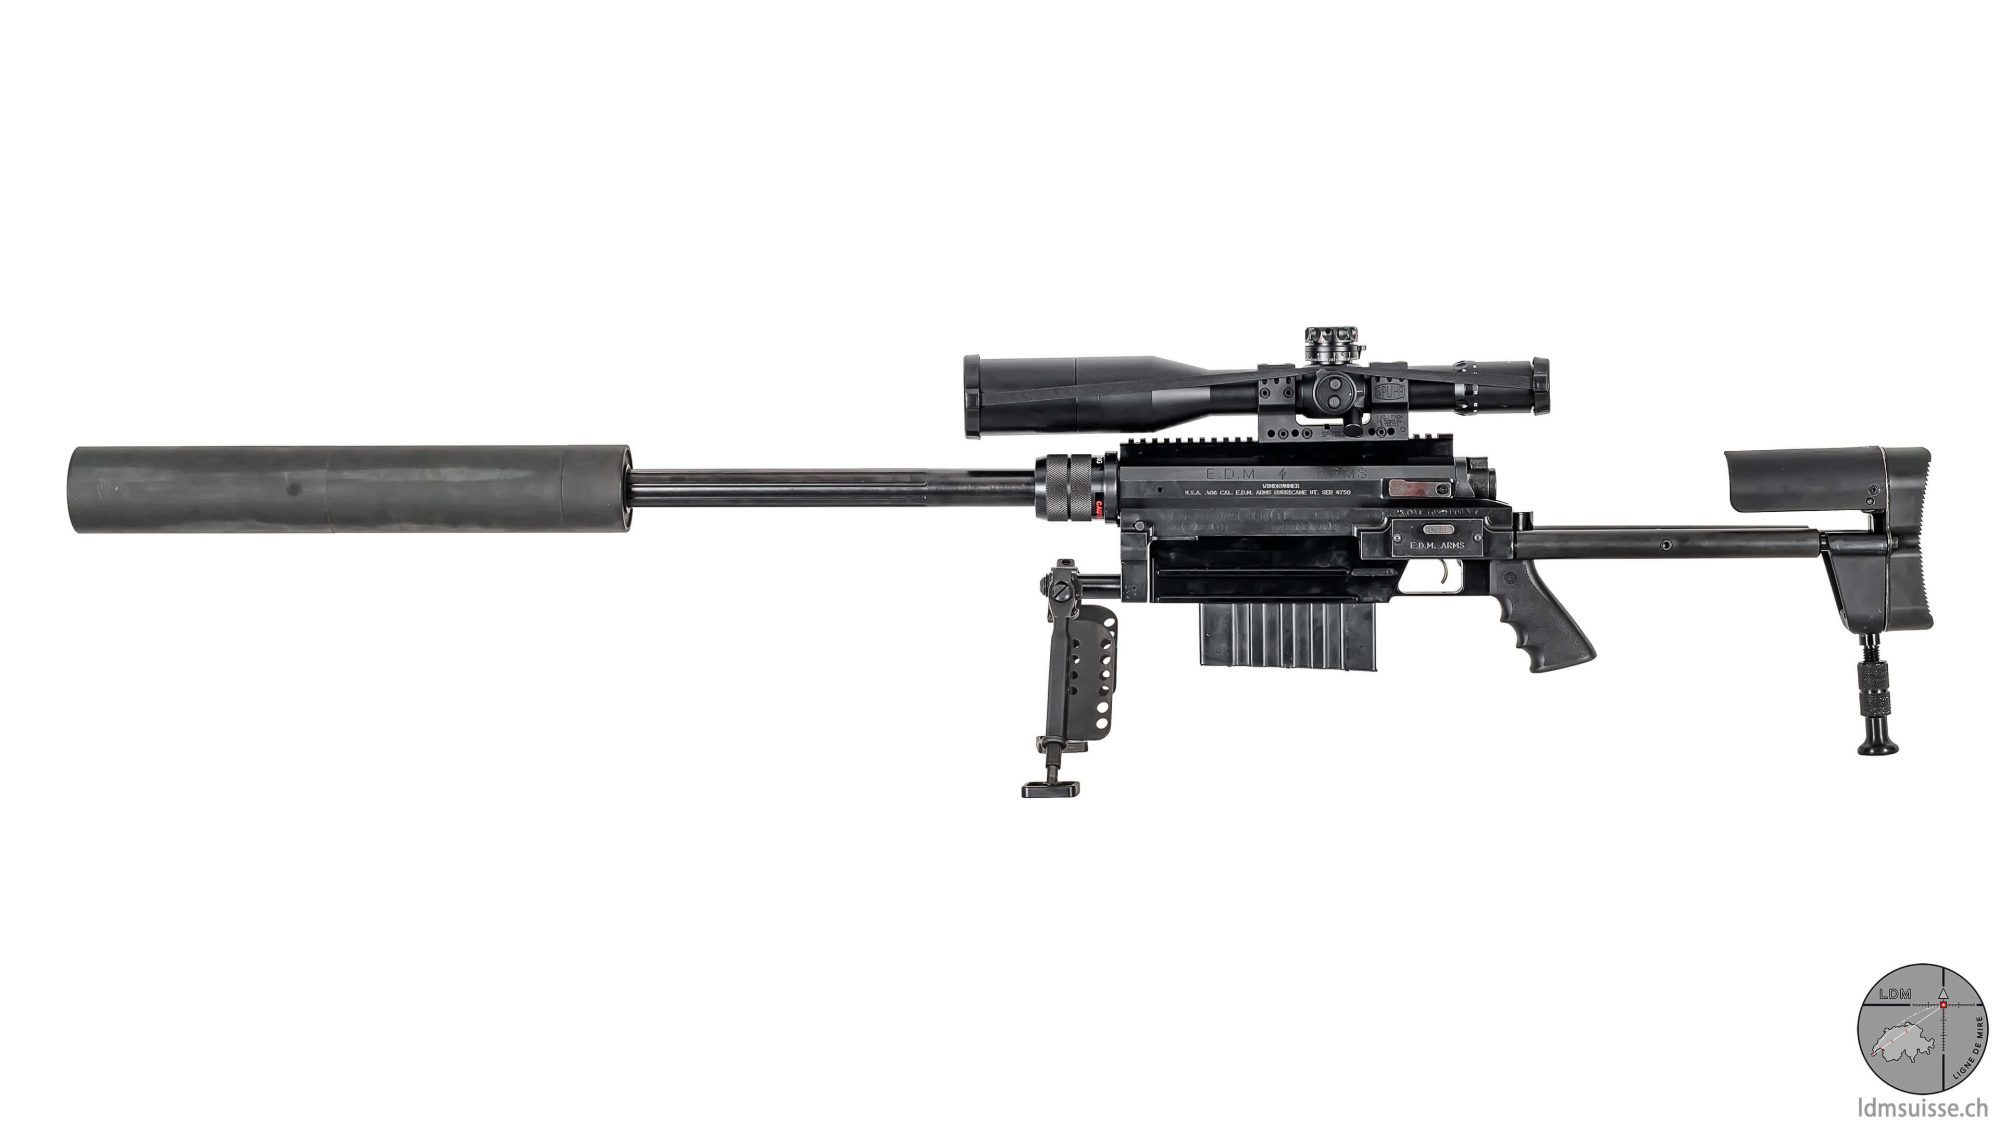 EDM Arms Windrunner M96 .50 Cal. BMG